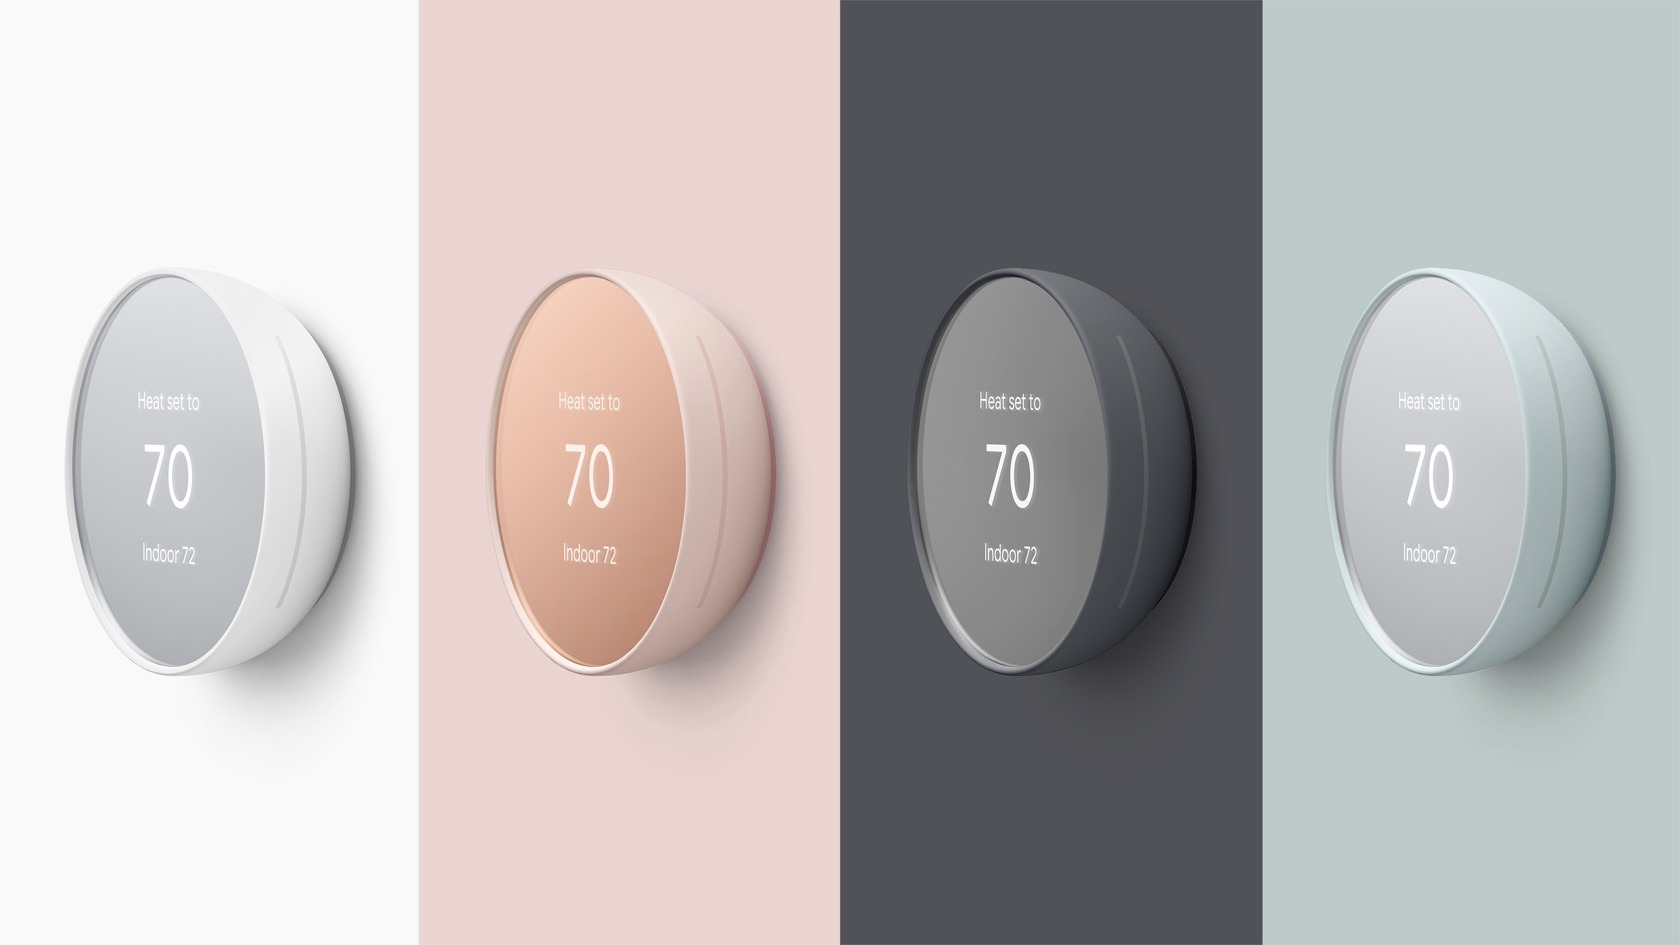 Nest Thermostat all colors